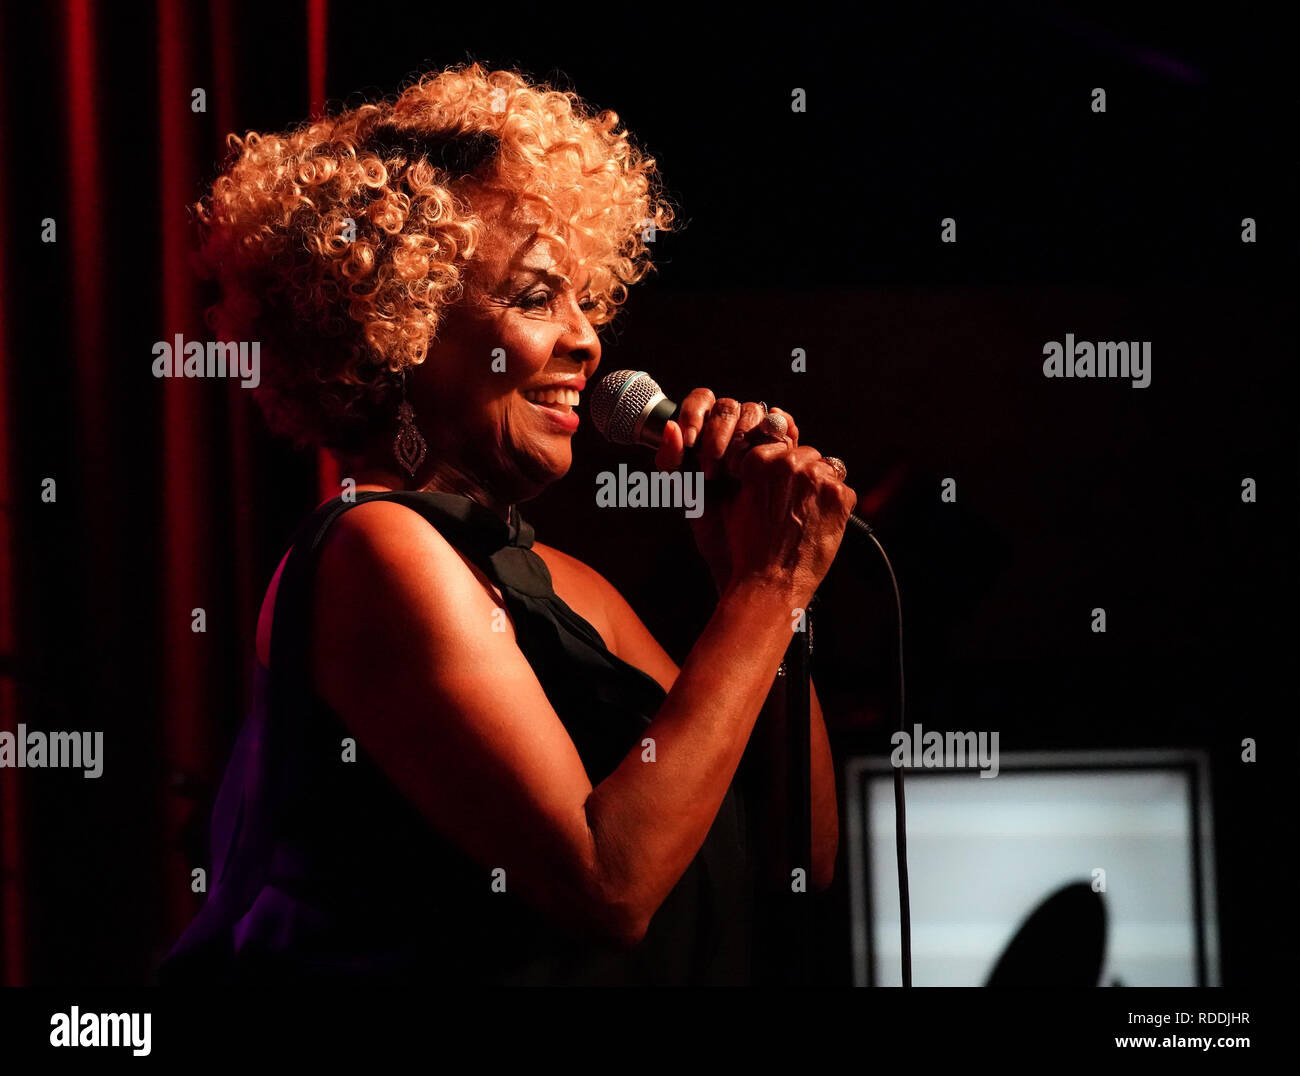 Los Angeles, CA, USA. 17th Jan, 2019. Musician Actor - THELMA HOUSTON, honored at The Grammy Museum, Los Angeles, CA, USA, January 17, 2019. Ms. Houston is an American singer and actress. She scored a number-one hit in 1977 with her recording of ''Don't Leave Me This Way'', which won the Grammy for Best Female R&B Vocal Performance. 25 years ago to the day, Ms. Houston lost her Grammy Award in the devastating Northridge earthquake. Scott Goldman, artistic director for the Grammy Muesum, presented Ms. Houston with a replacement grammy award. Ms. Houston performed some of her biggest hi Stock Photo